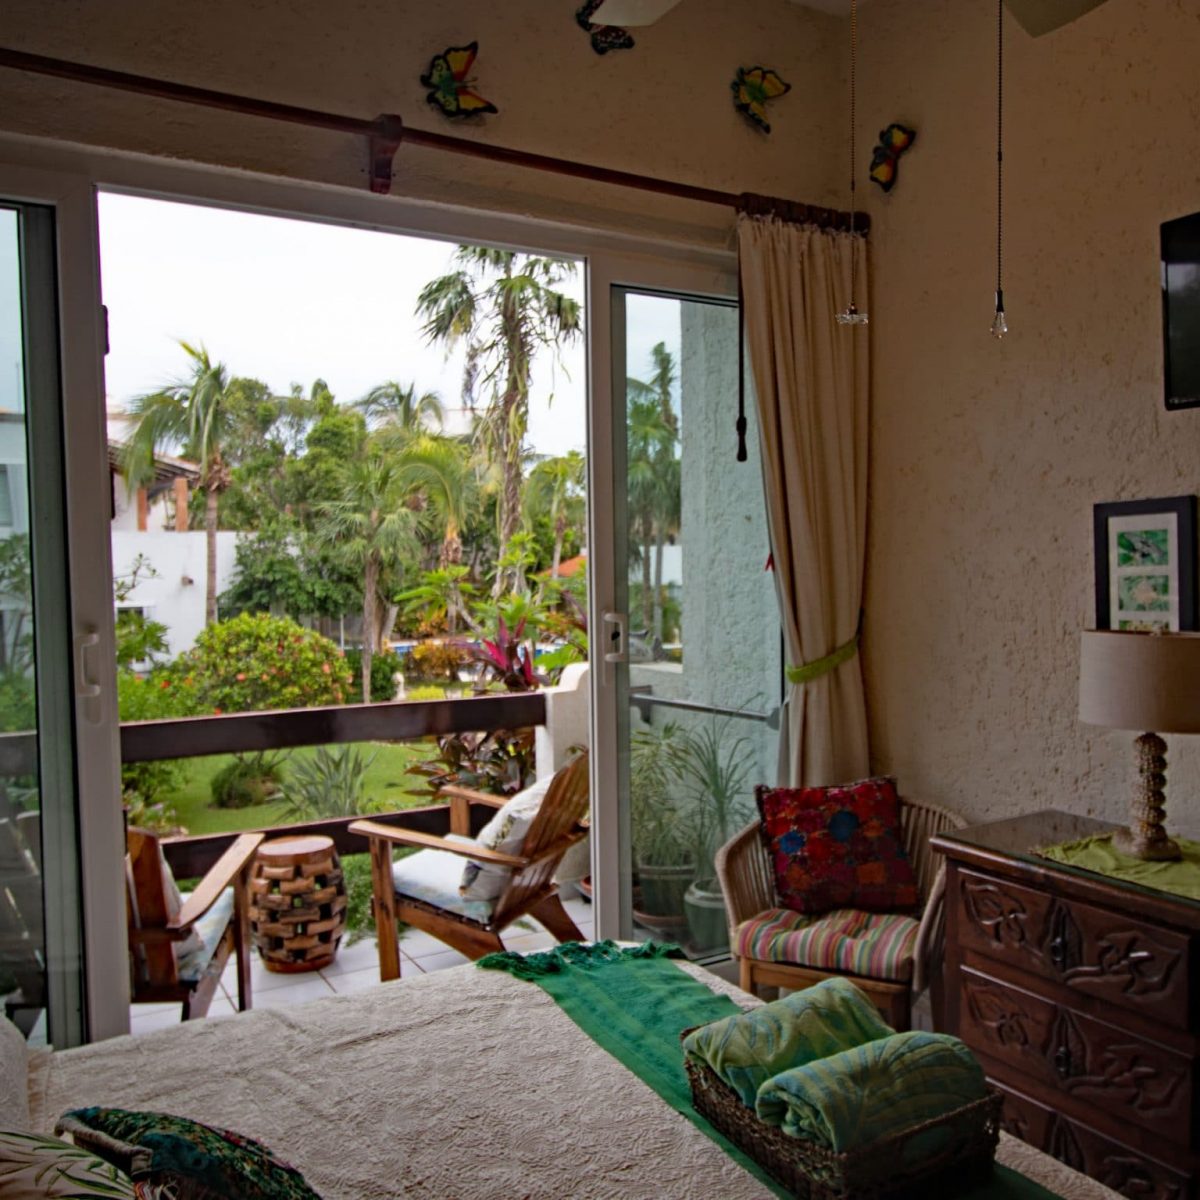 Seascape, La Sirena 1: The 2nd bedroom with personal TV and it's private porch overlooking La Sirena's gardens